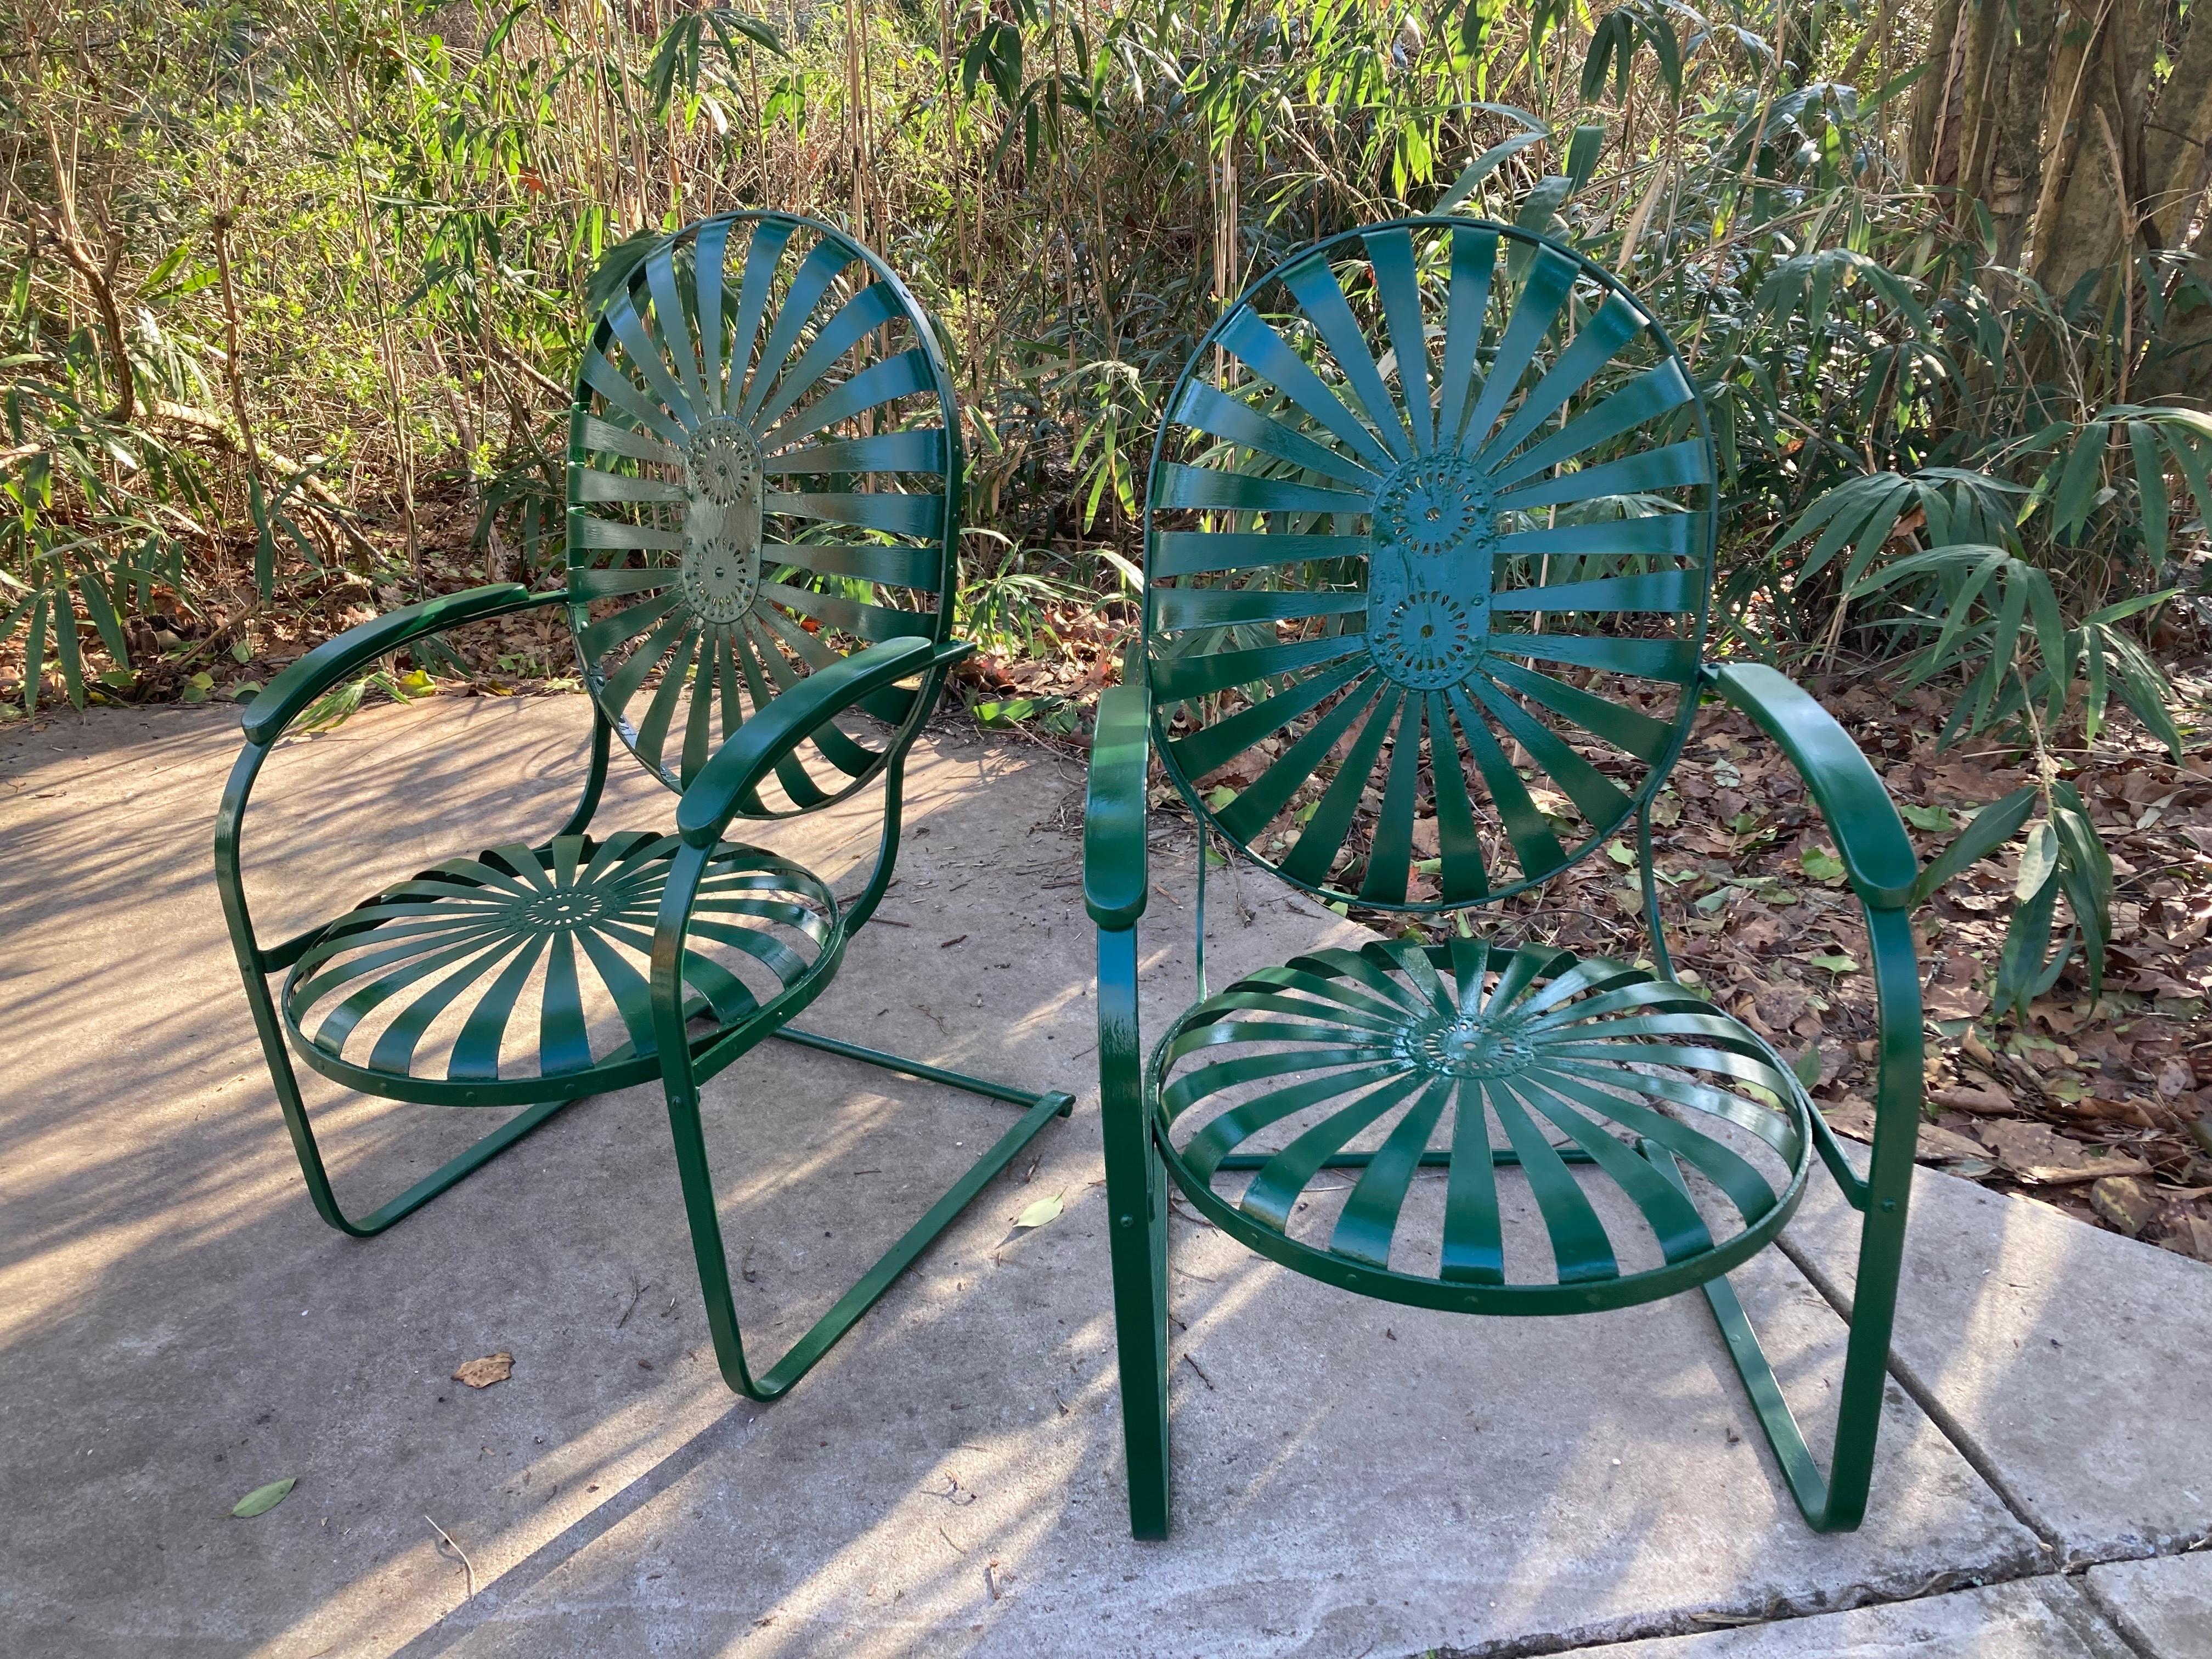 iconic pair in hunter green, large cantilever ‘bouncers’. spring wheel design with steel fins and an iron frame. sold as a pair
no maker’s mark less

DIMENSIONS
25ʺW × 26ʺD × 41.5ʺH